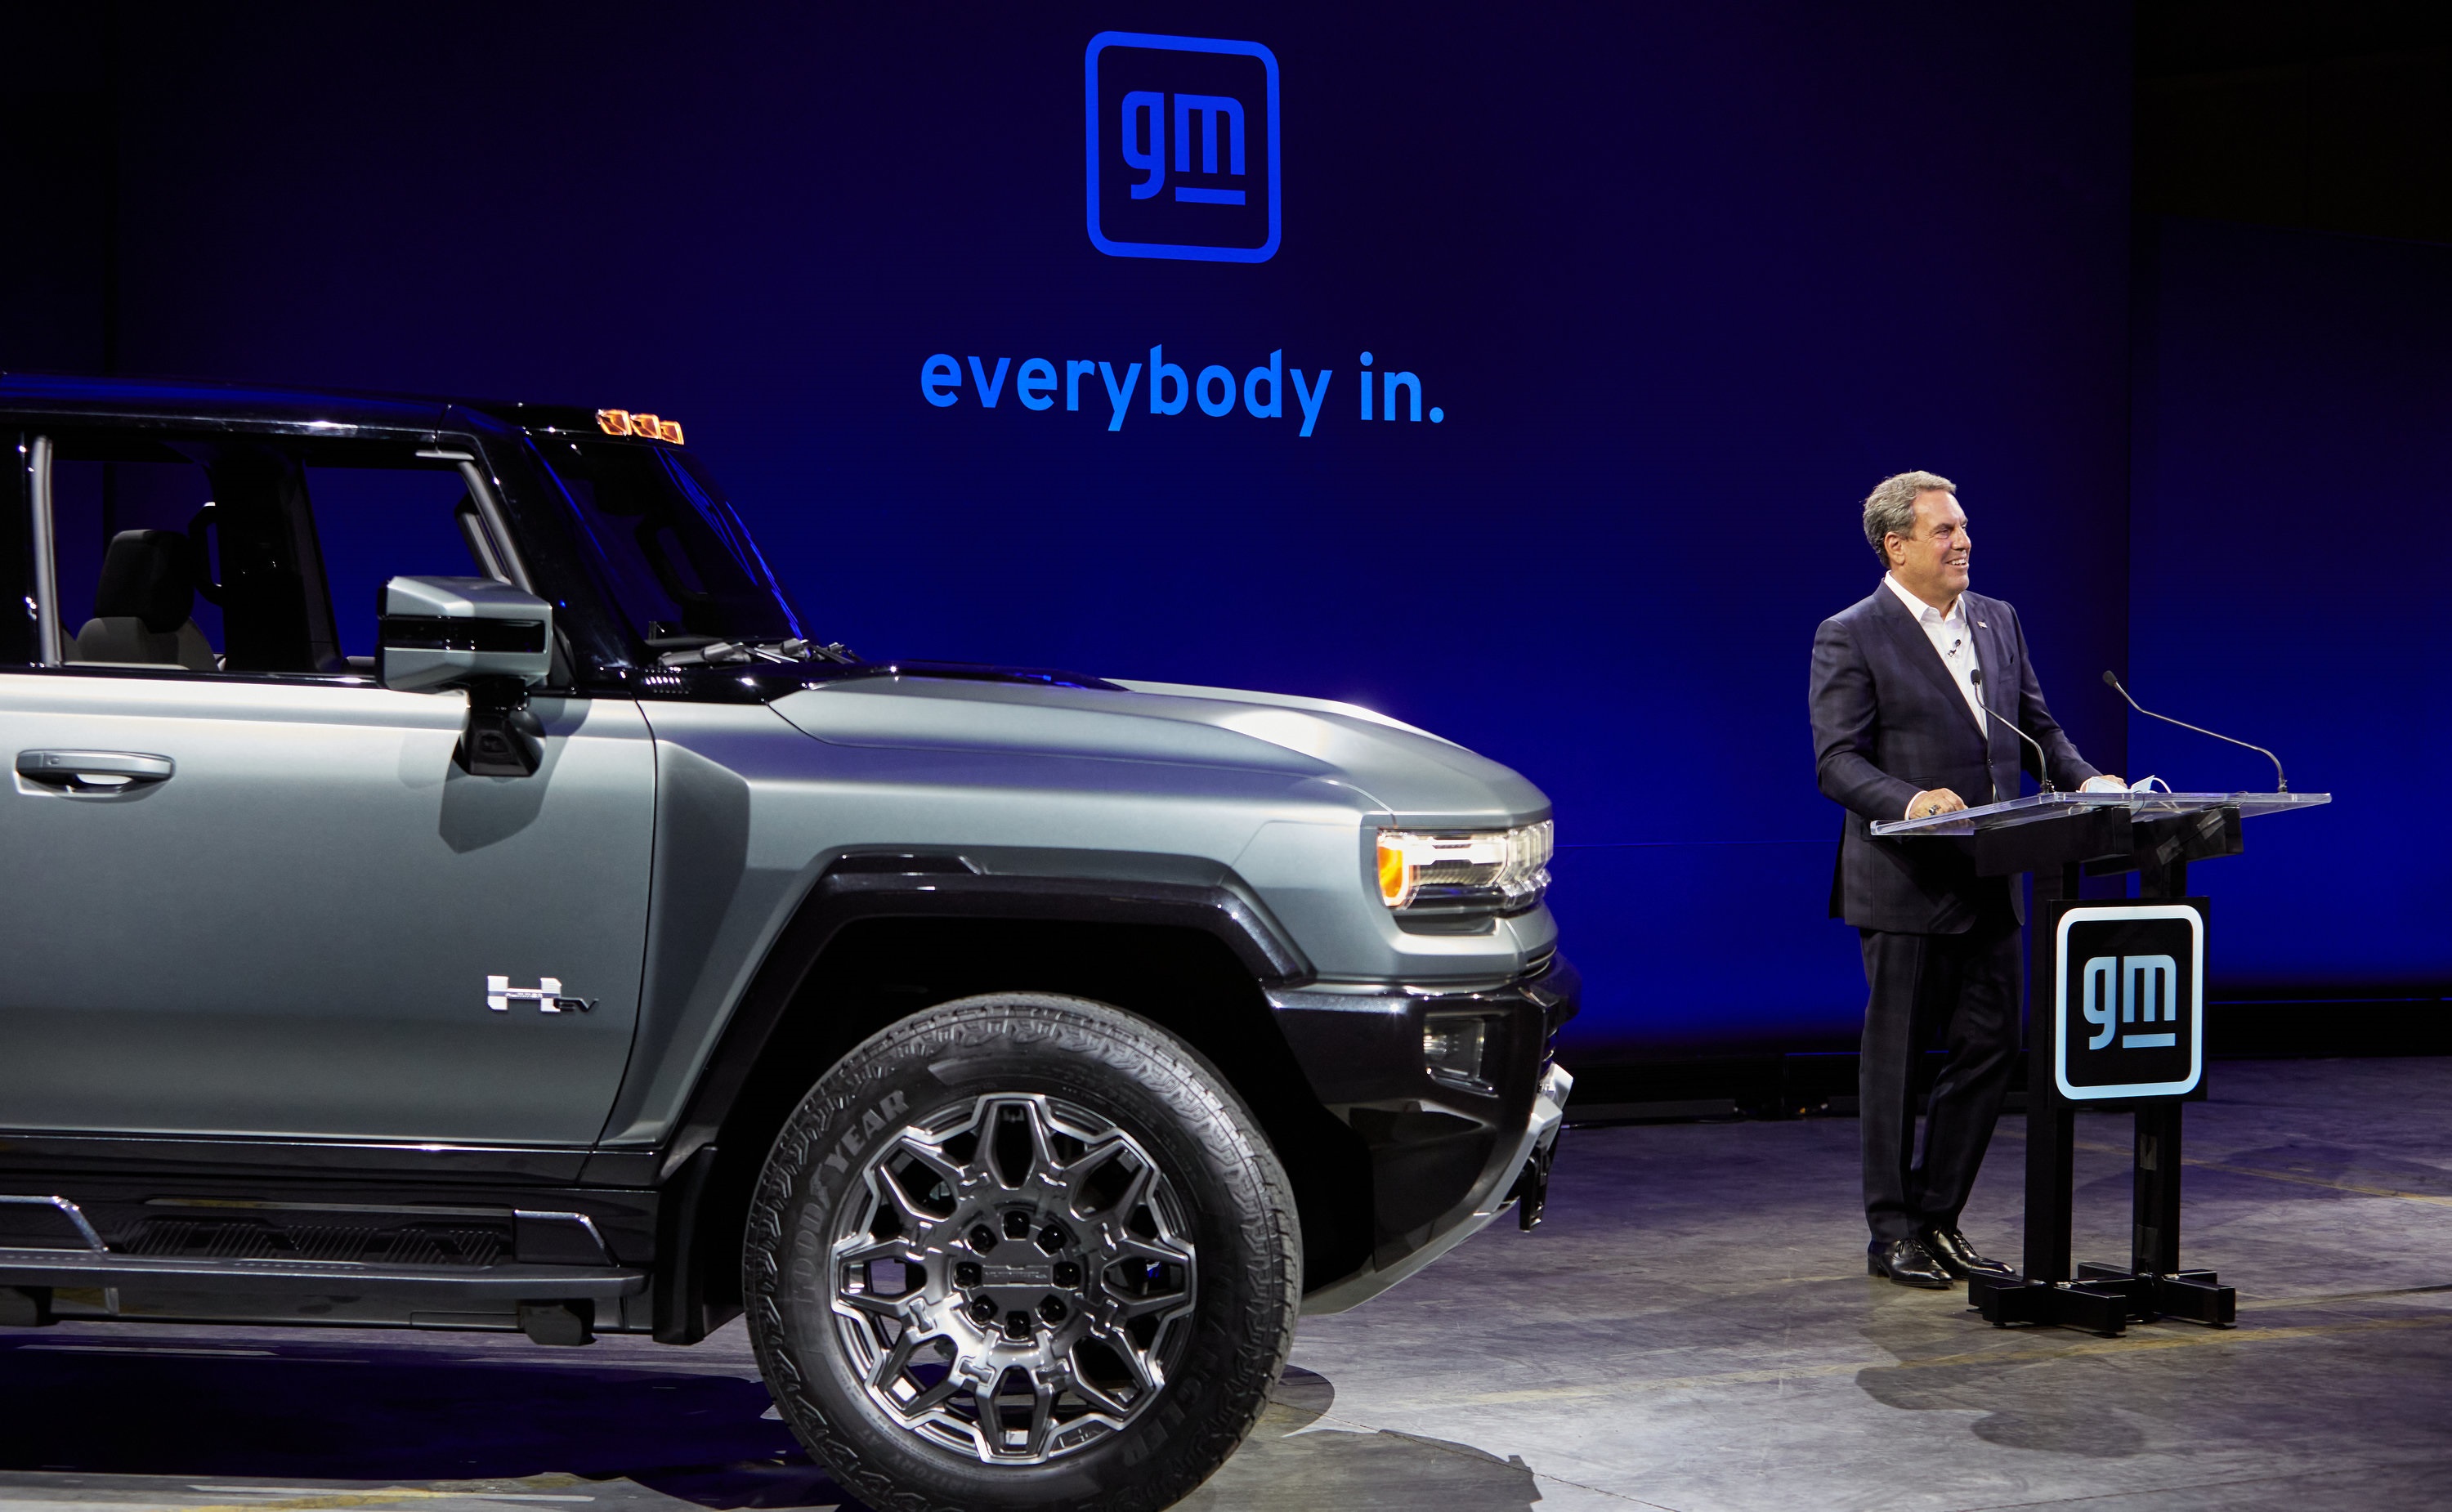 General Motors Commits Models to Factory ZERO as Granholm Highlights